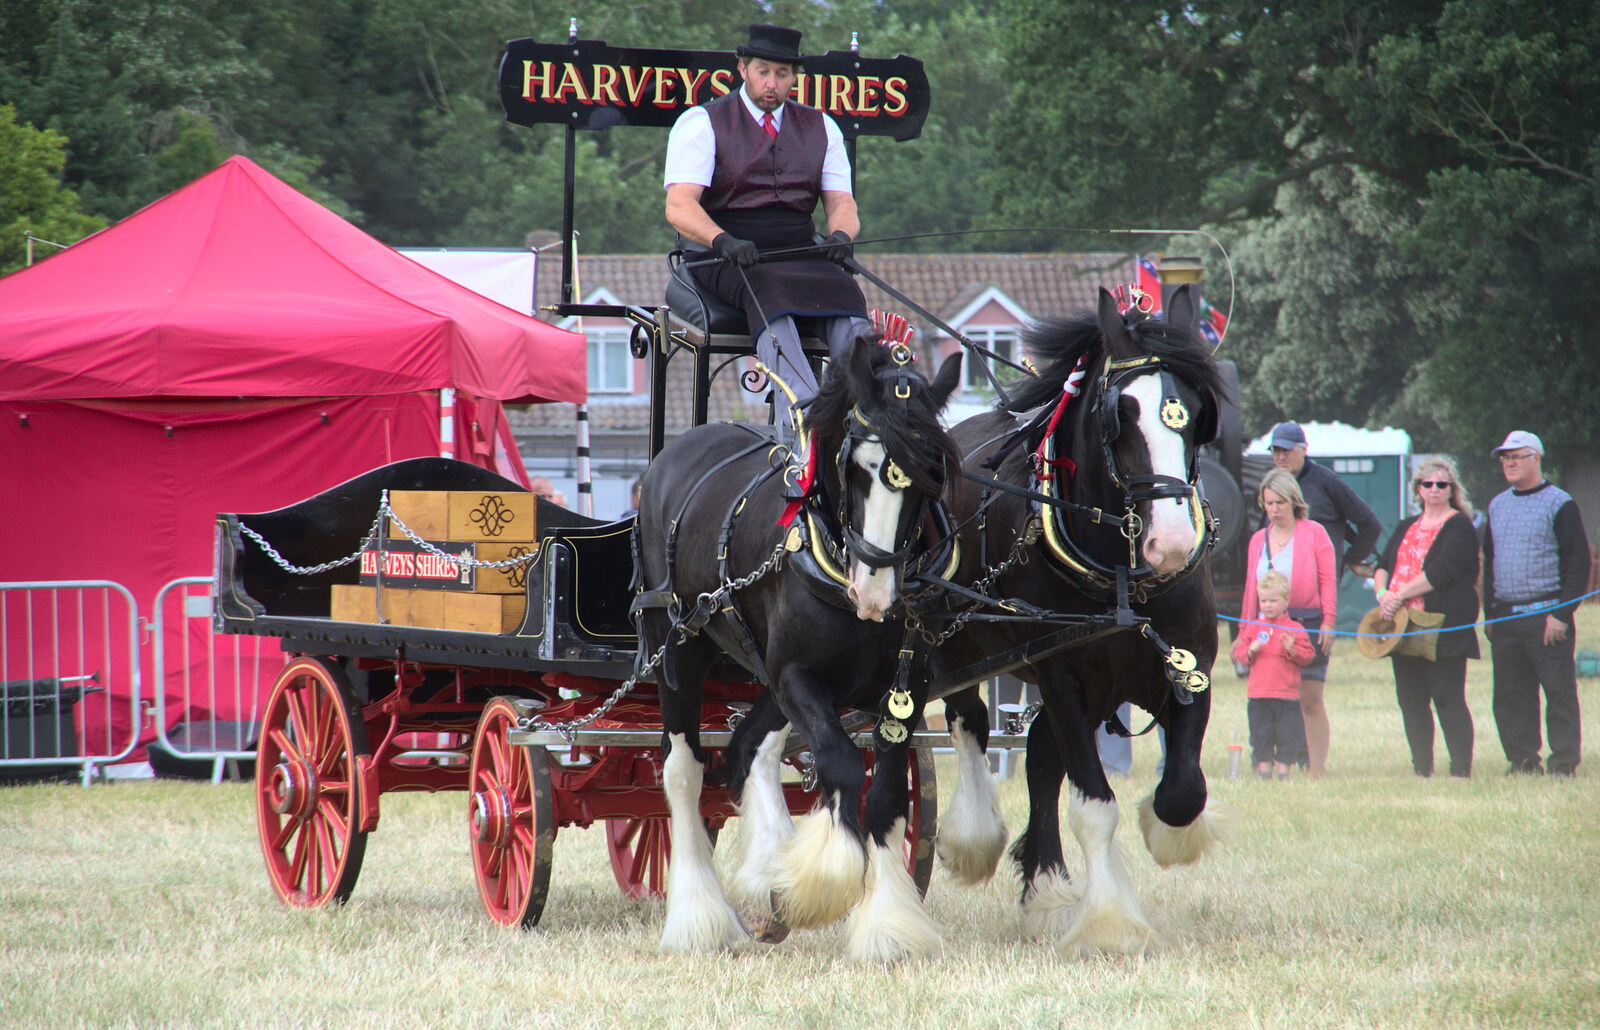 The Harvey's Shires trot around the show ring from The Formerly-Known-As-The-Eye-Show, Palgrave, Suffolk - 17th June 2018